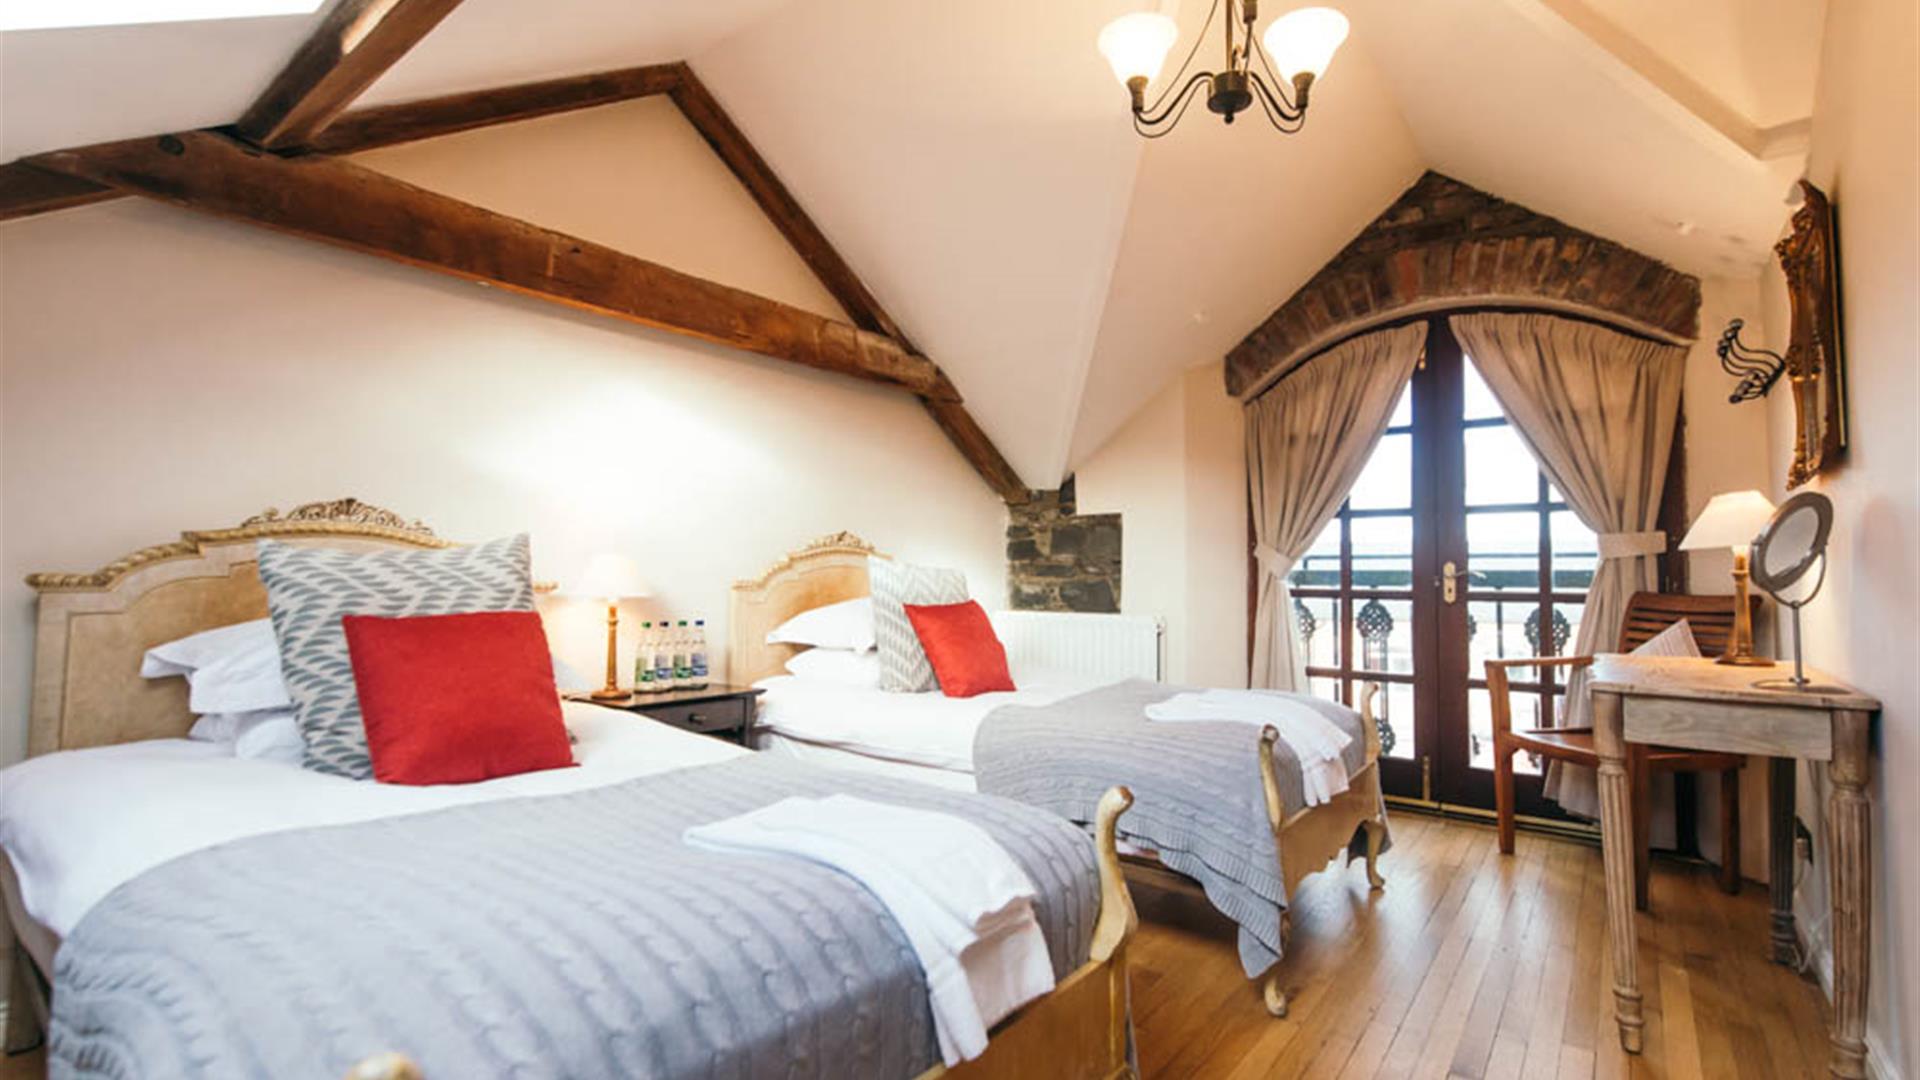 image shows bedroom with double bed and single bed, wooden flooring, exposed beams and dressing table with mirror